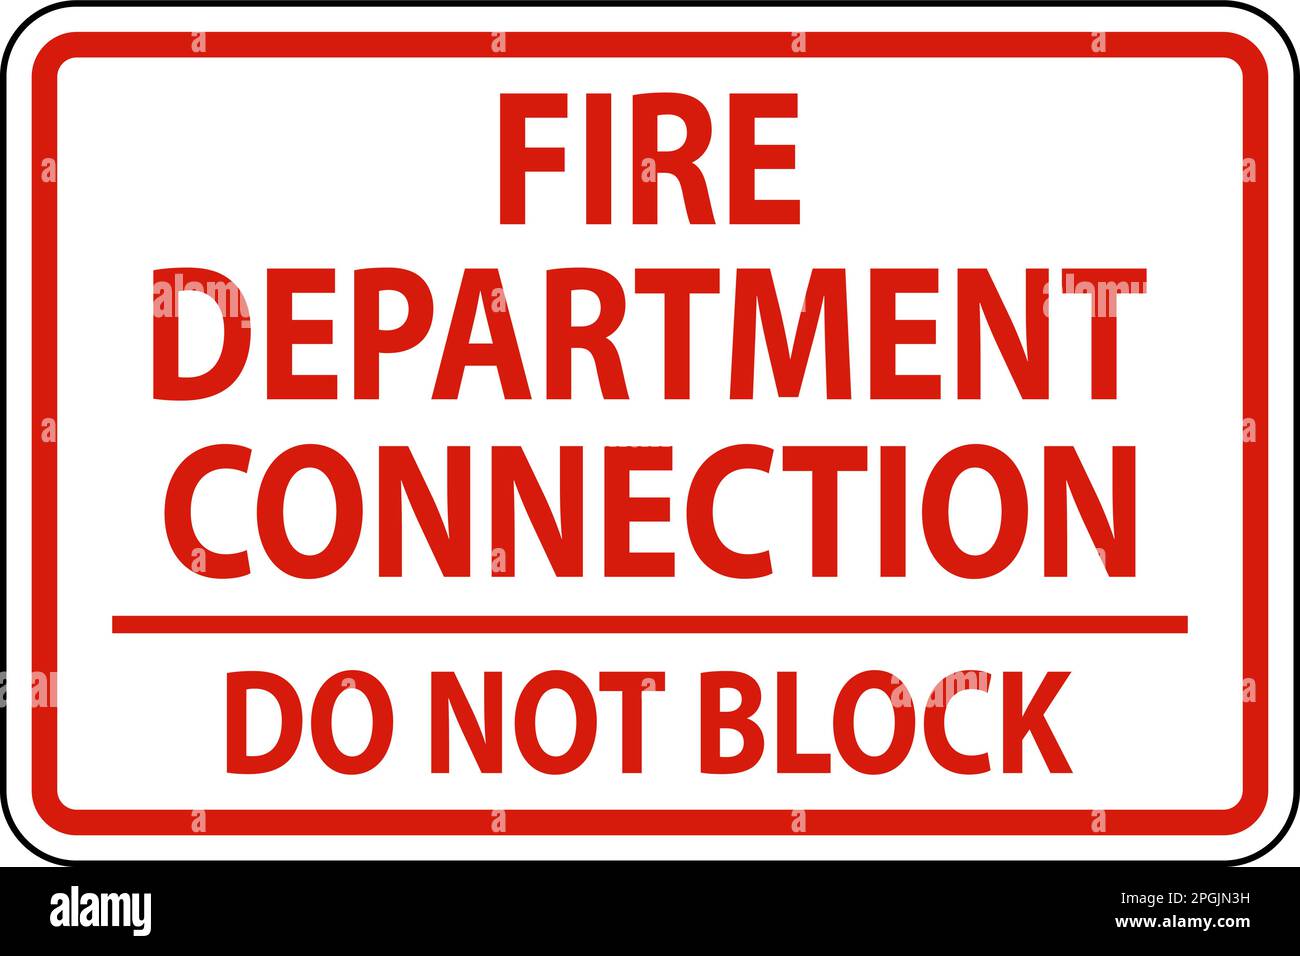 Fire Department Connection Sign On White Background Stock Vector